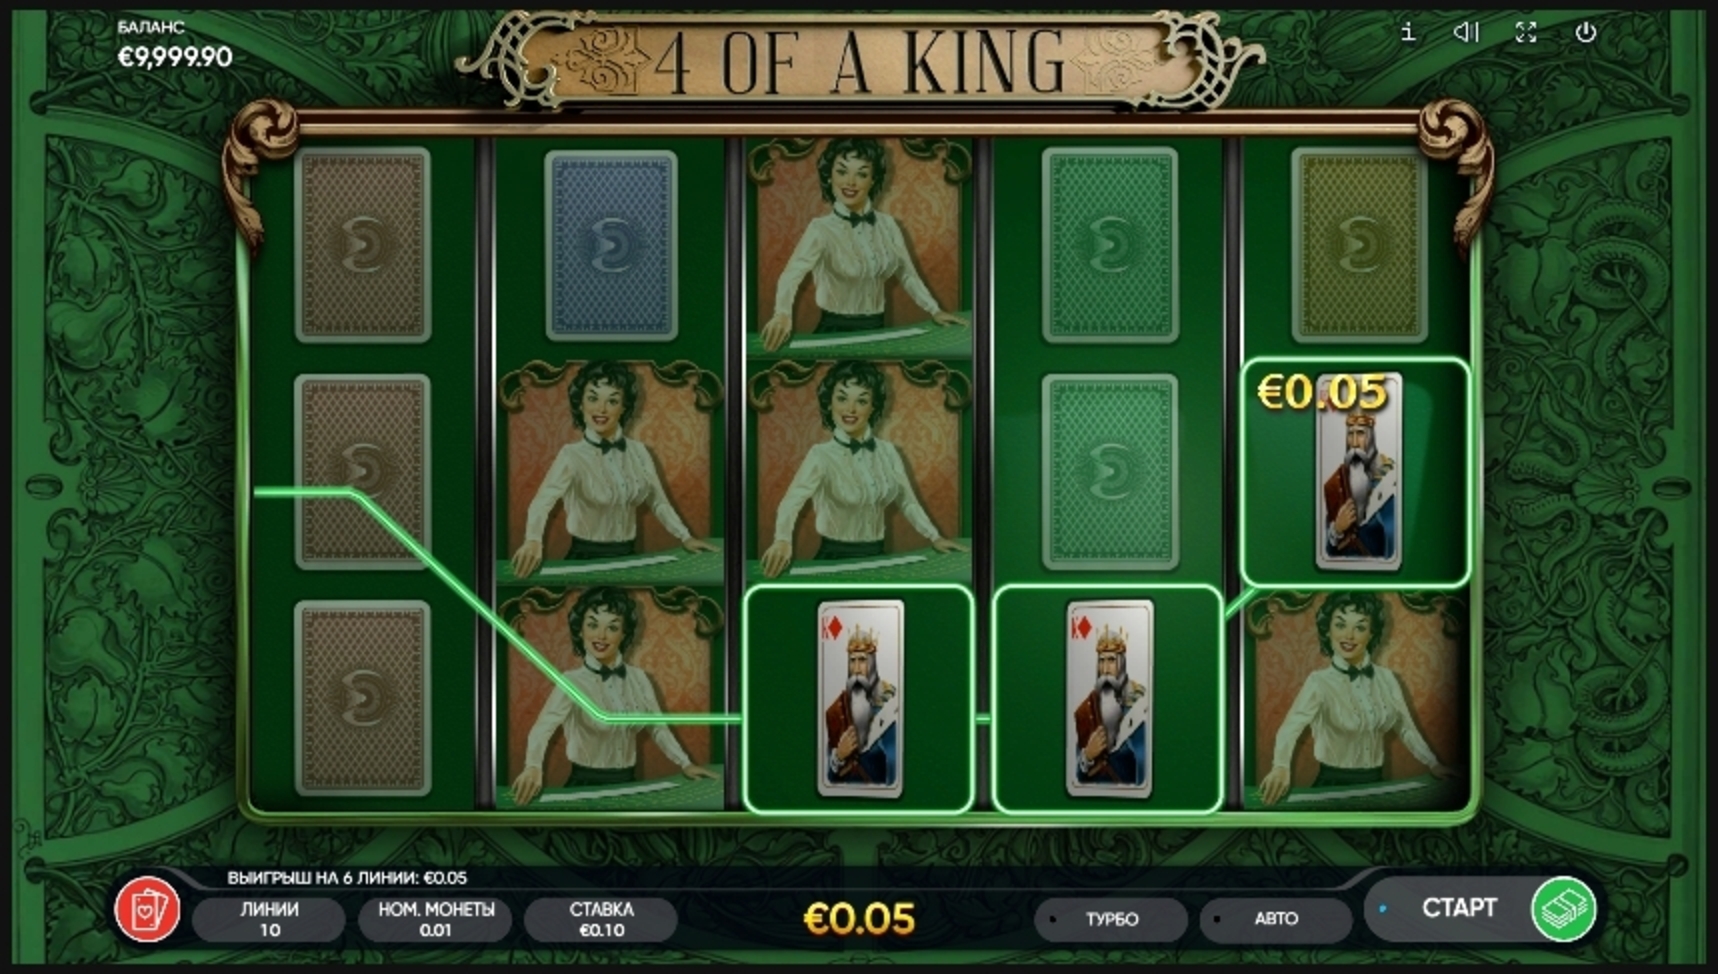 Win Money in 4 of a King Free Slot Game by Endorphina